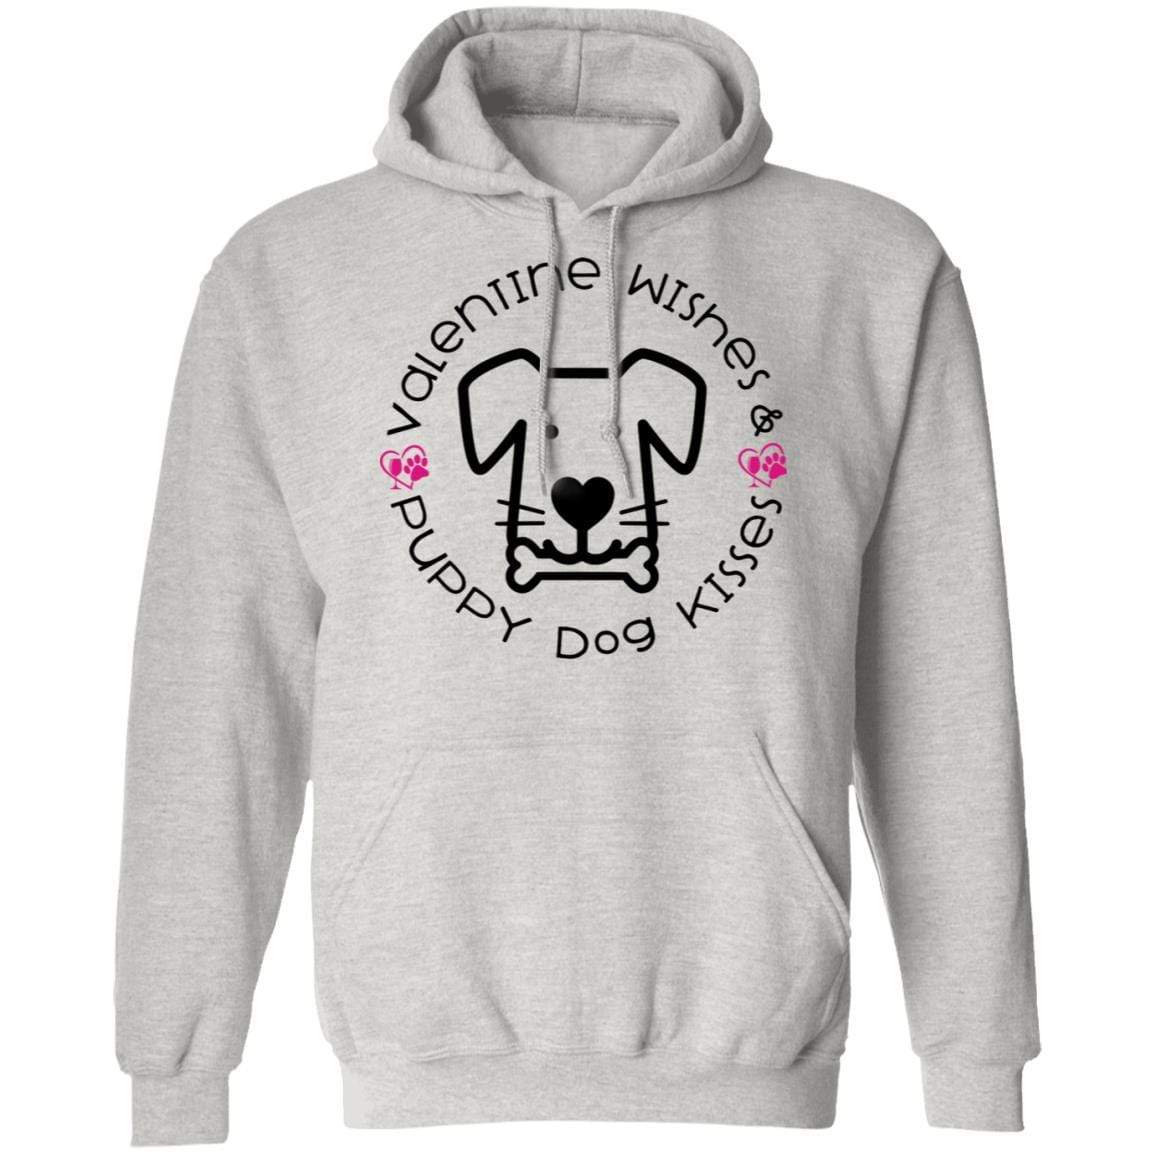 Sweatshirts Ash / S Winey Bitches Co Valentine Wishes and Puppy Dog Kisses" (Dog) Pullover Hoodie 8 oz. WineyBitchesCo